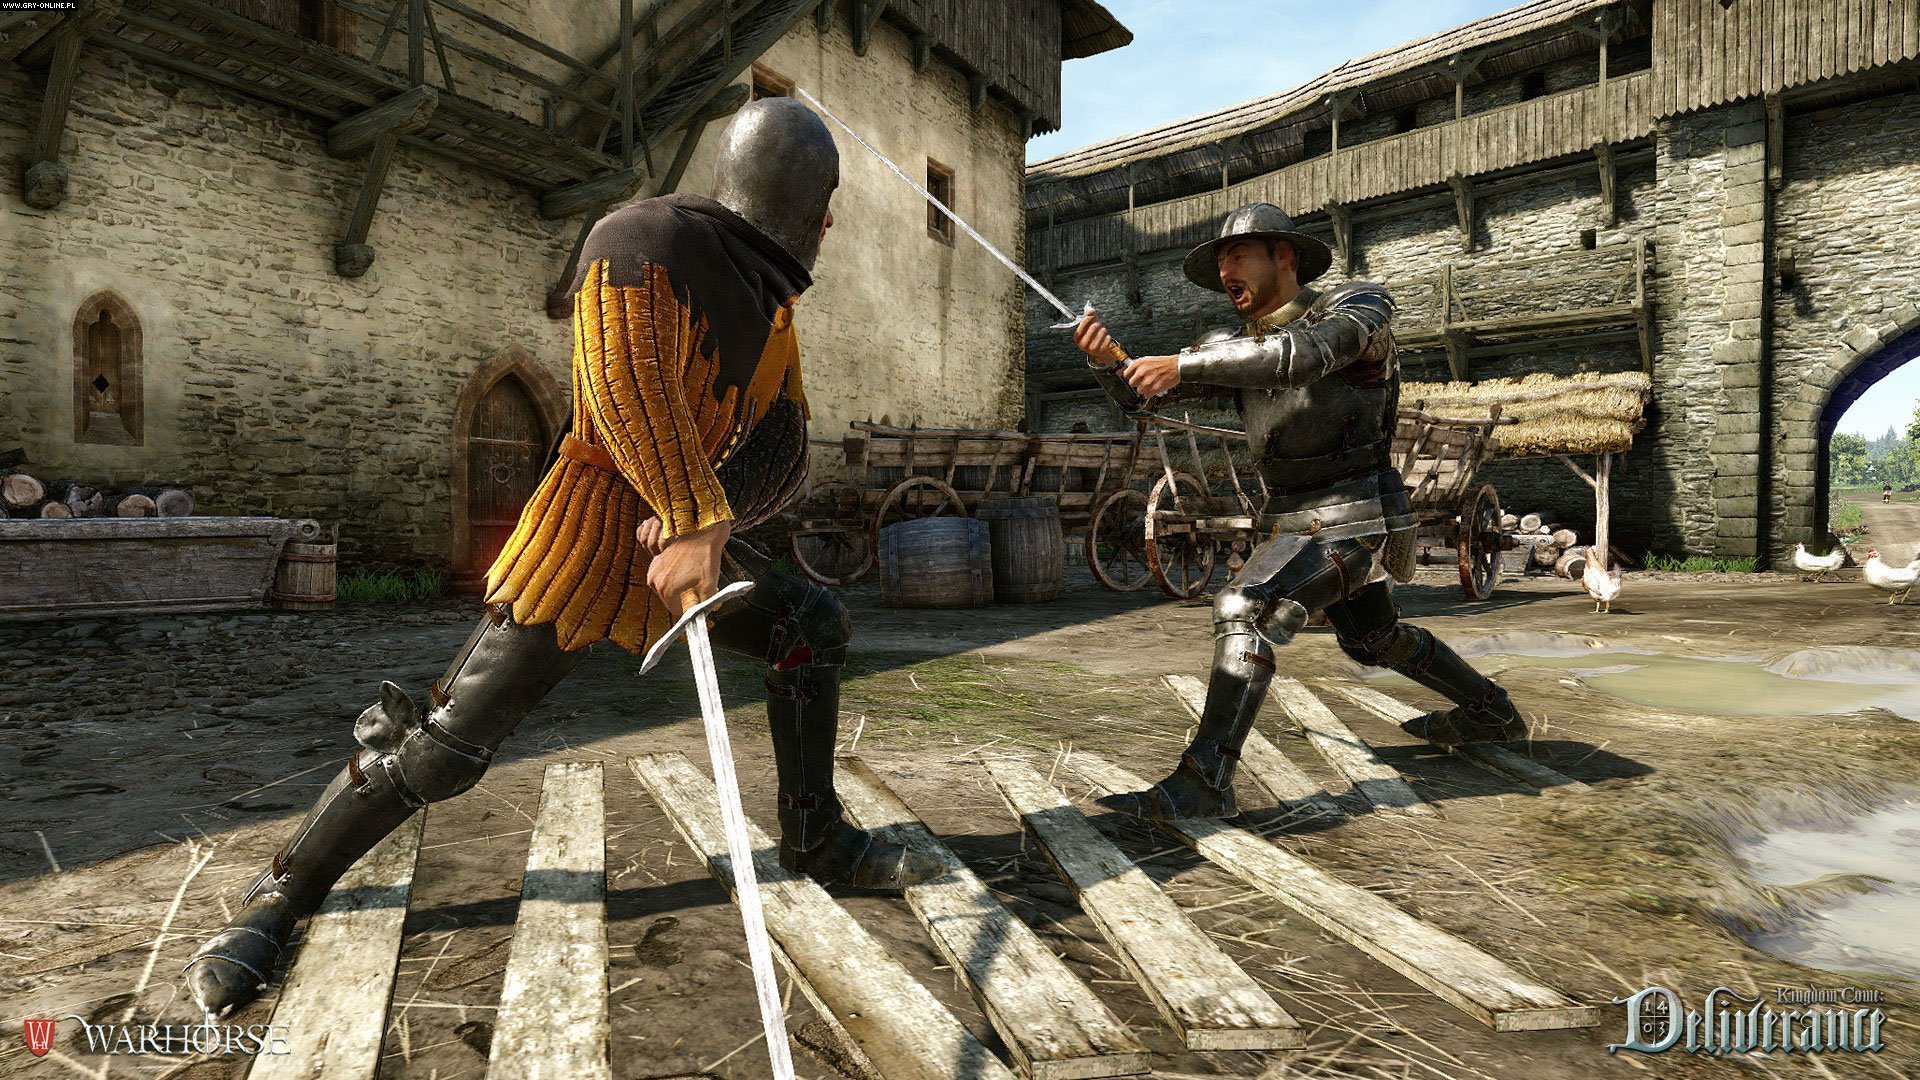 Best Kingdom Come: Deliverance wallpaper ID:277805 for High Resolution full hd computer